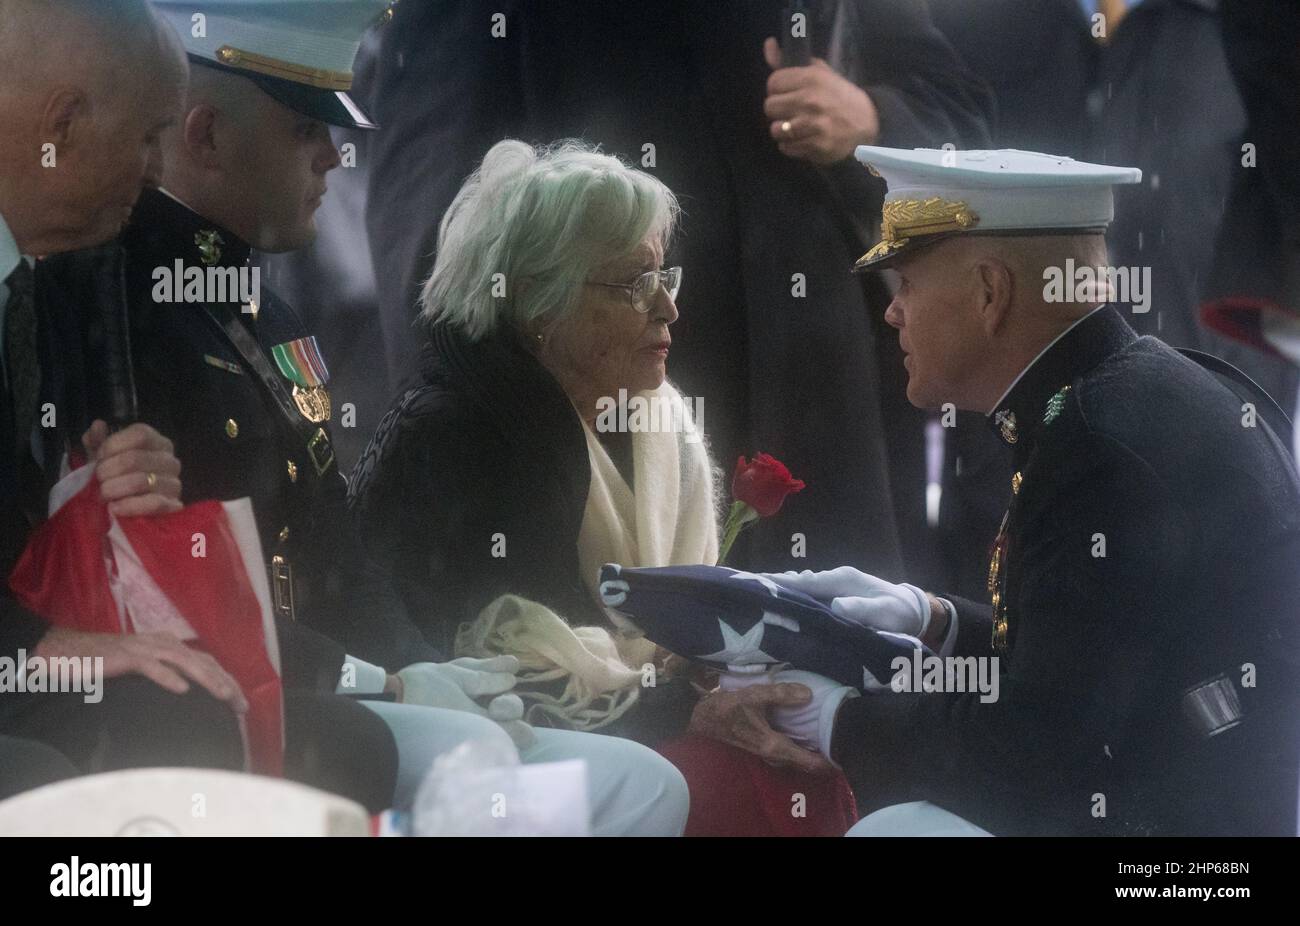 Annie Glenn, wife of former astronaut and U.S. Senator John Glenn receives the folded American flag from Commandant of the U.S. Marine Corps, General Robert B. Neller, during a graveside interment ceremony at Arlington National Cemetery in Virginia on Thursday, April 6, 2017, the day on which Glenn and Annie were married in 1943. Stock Photo